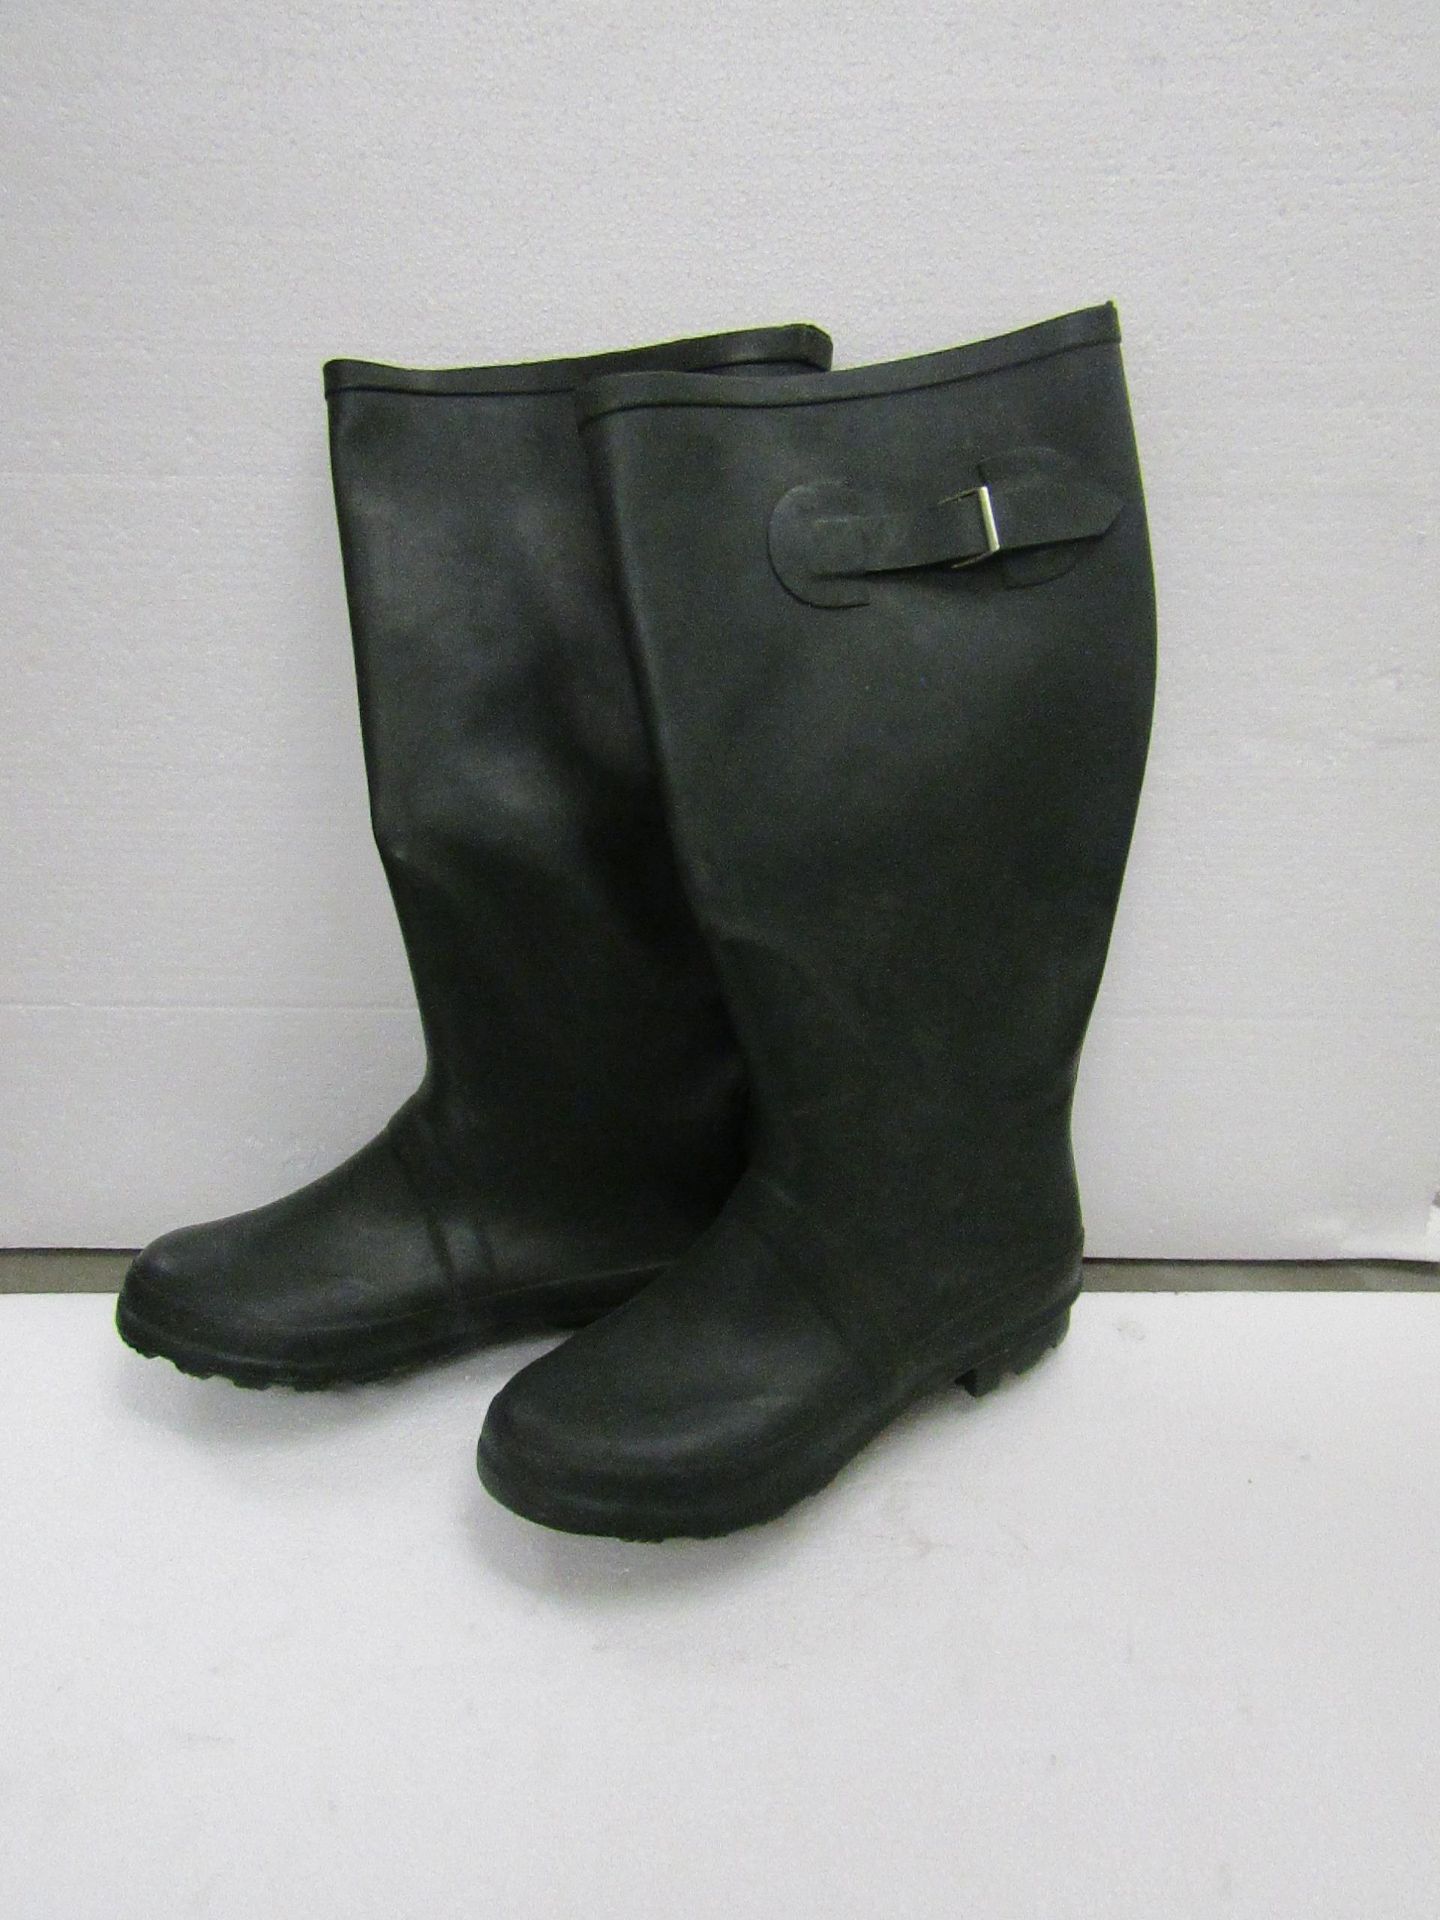 Green Rubber Boots size 37 new see image